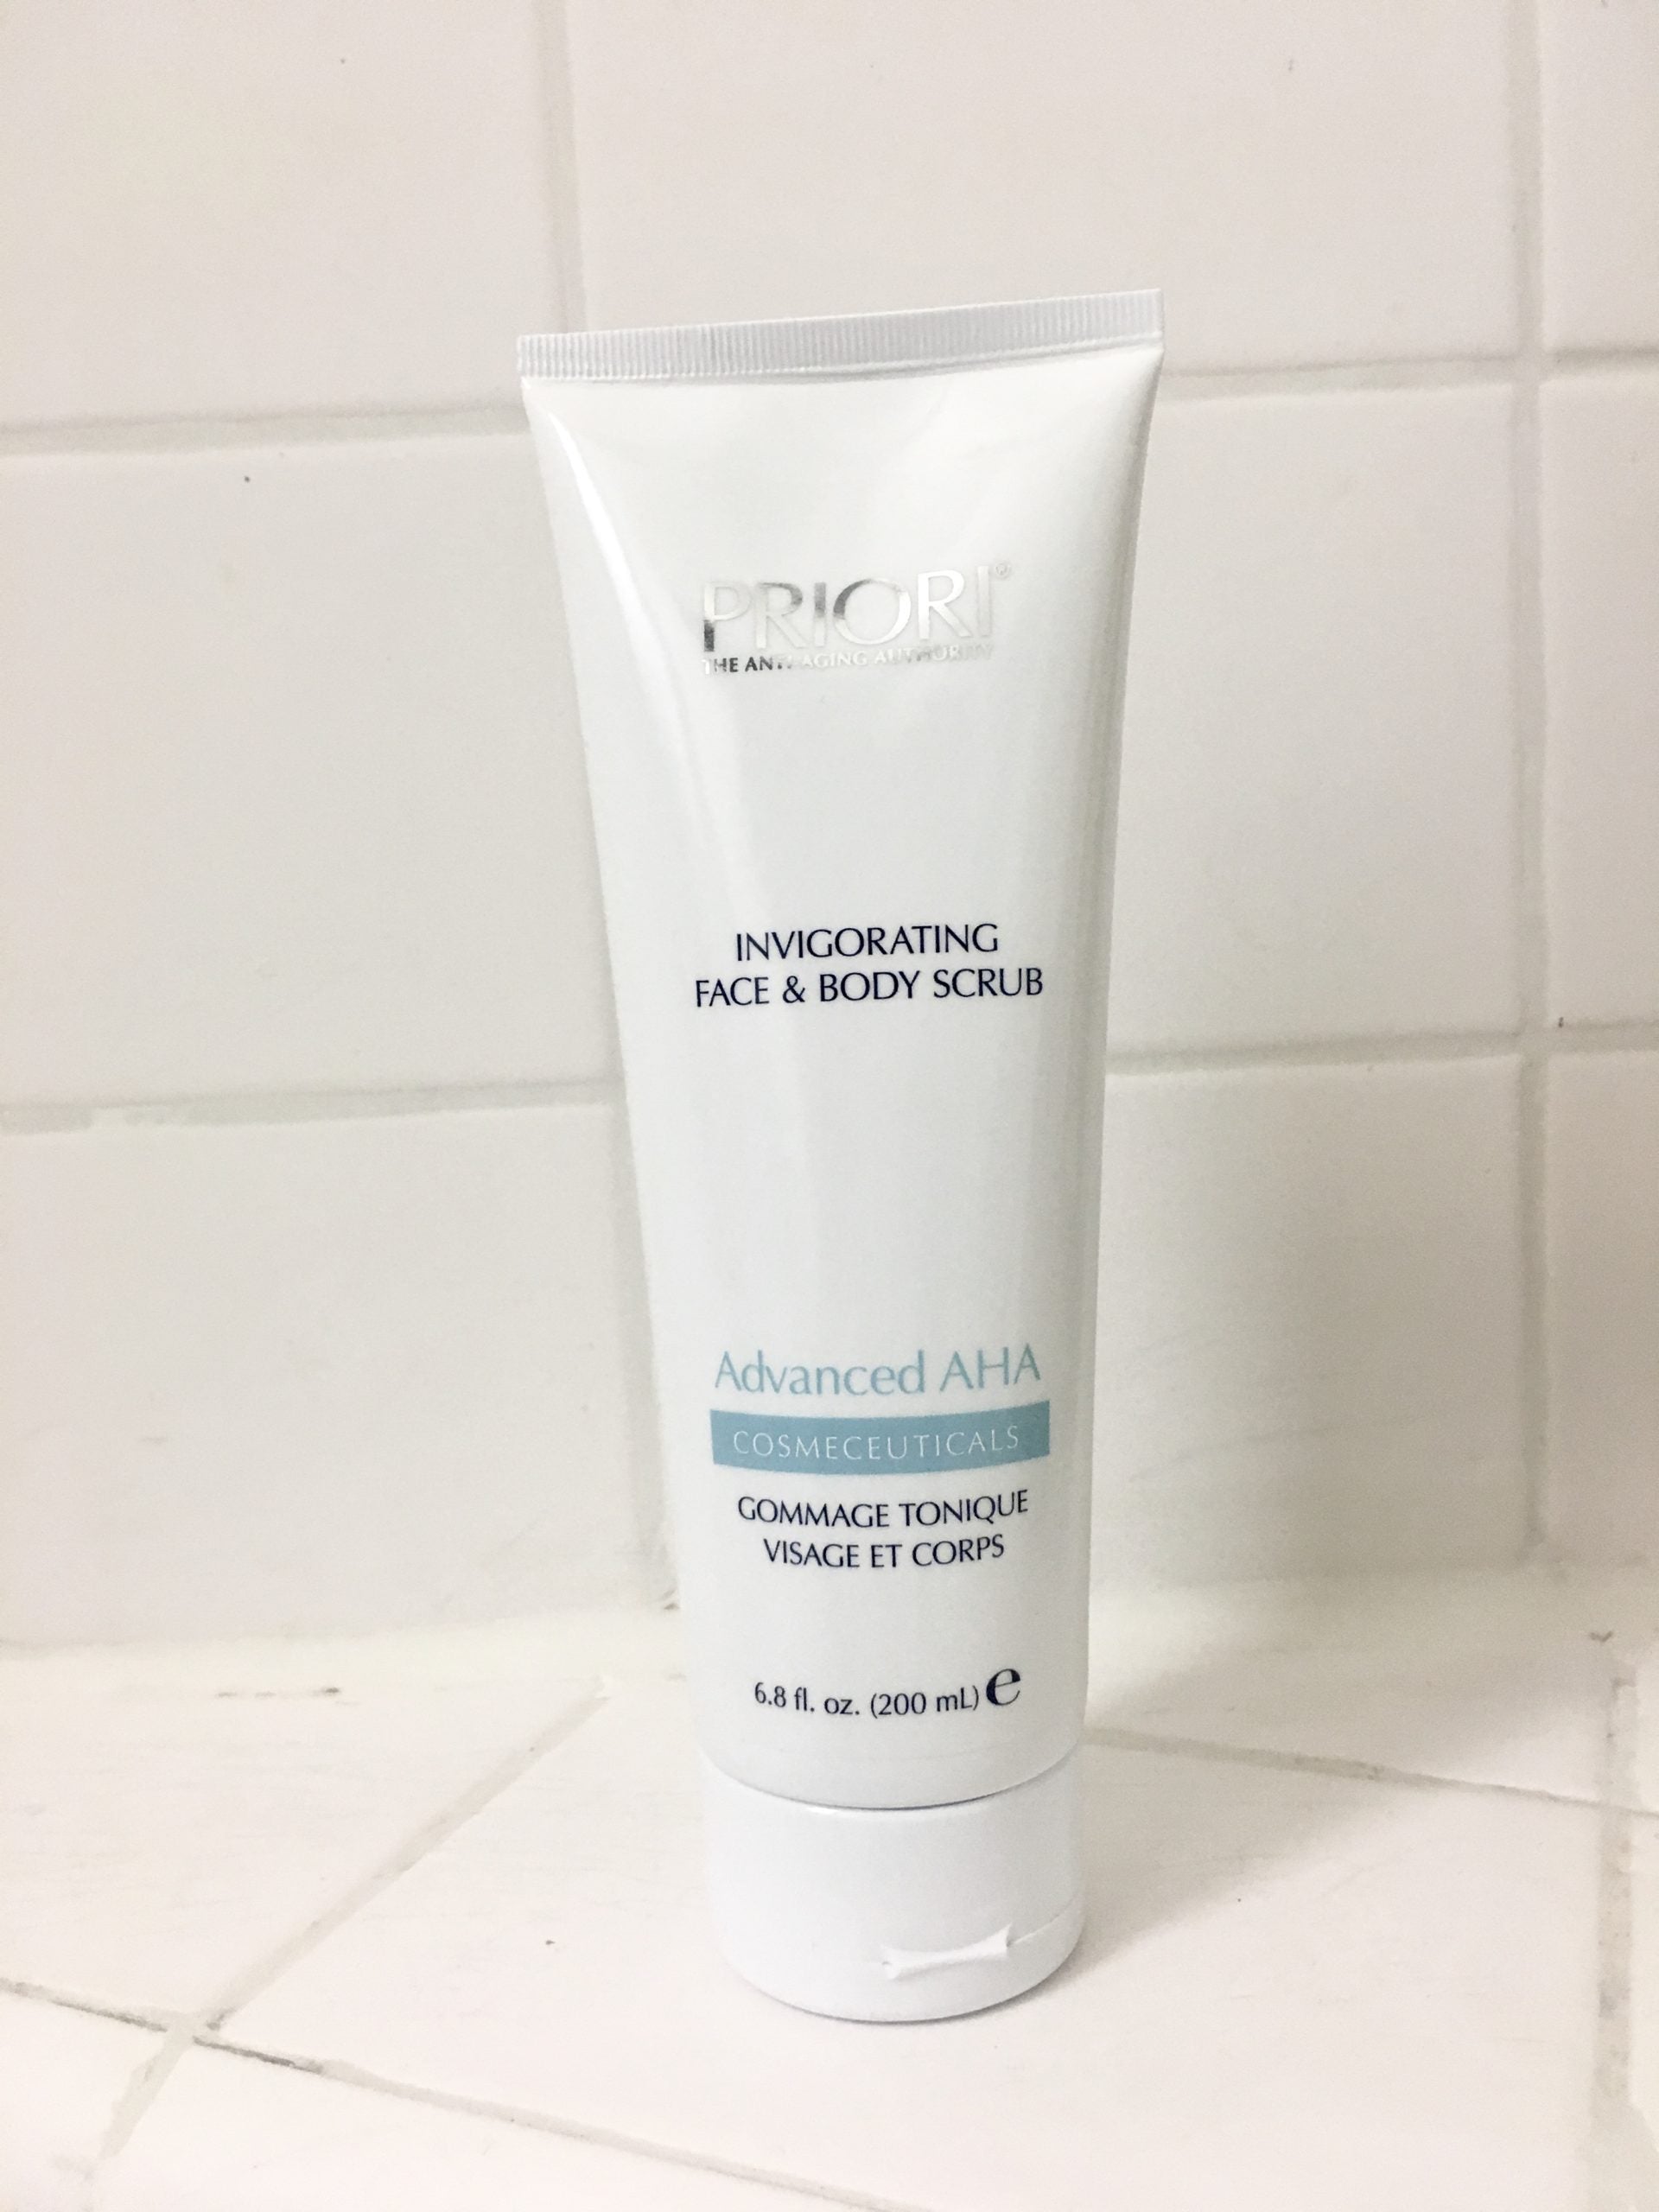 Review, Ingredients, Photos, Swatches, Skincare Trend 2017, 2018, 2019: Priori Advanced AHA Invigorating Face and Body Scrub